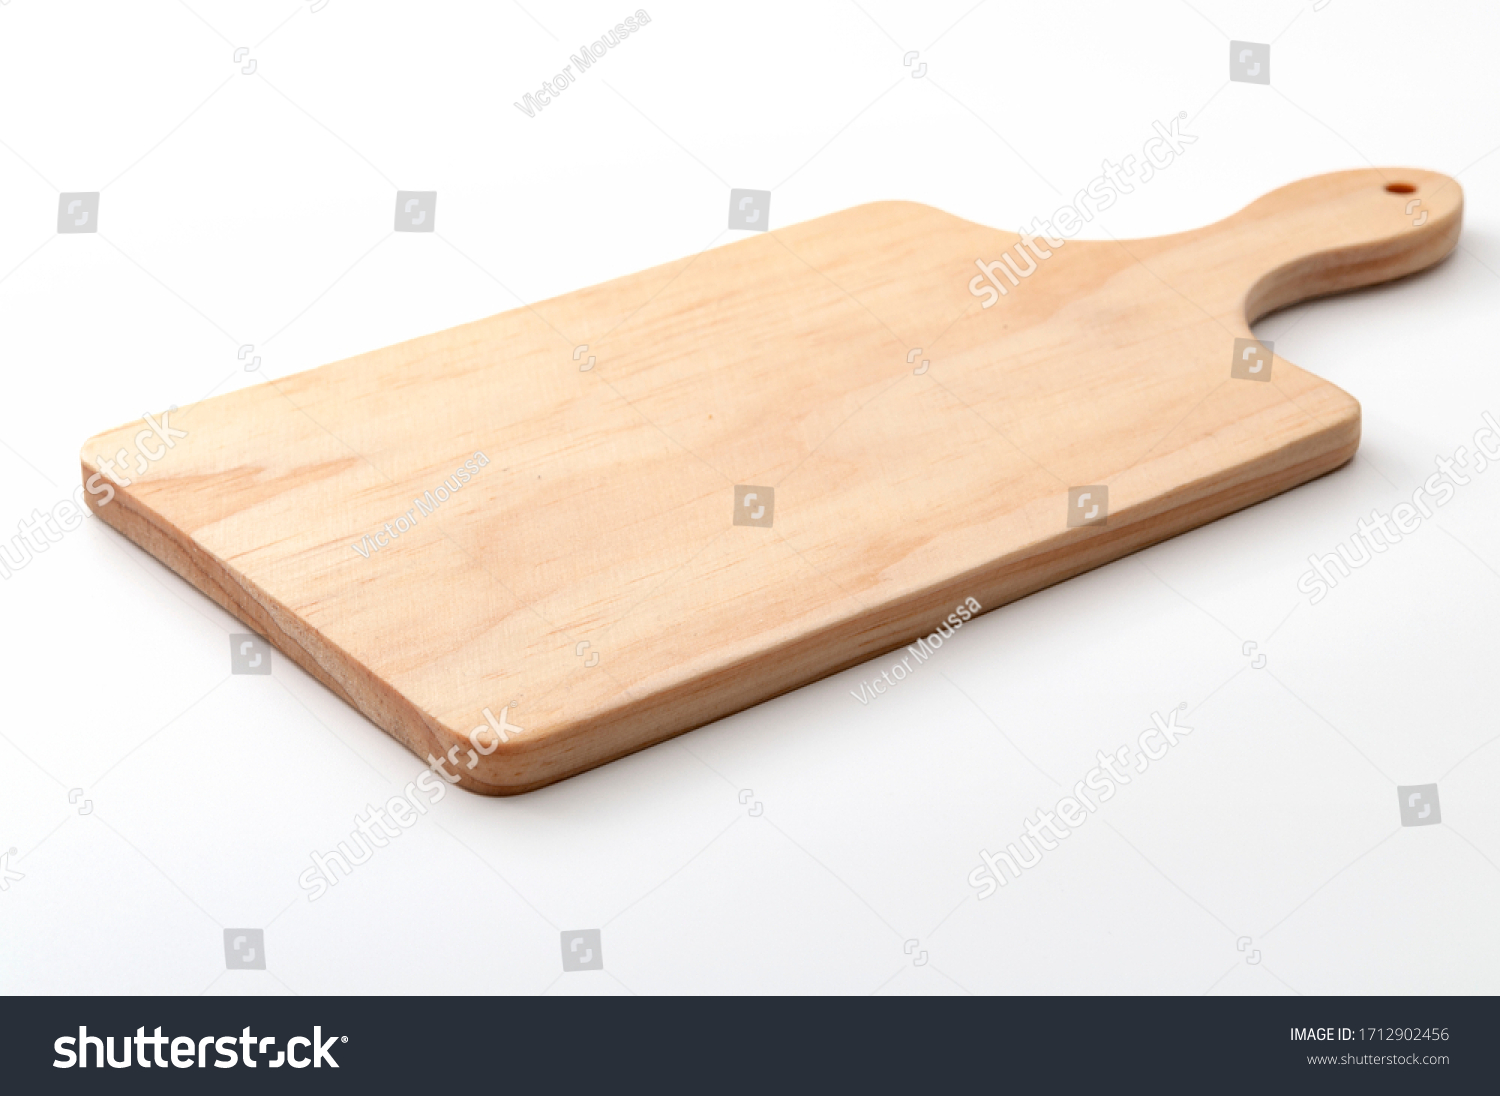 Food preparation tool and kitchen utensils concept with close-up on rectangular wood chopping board with round corners isolated on white background at an angle perspective with clipping path cutout #1712902456